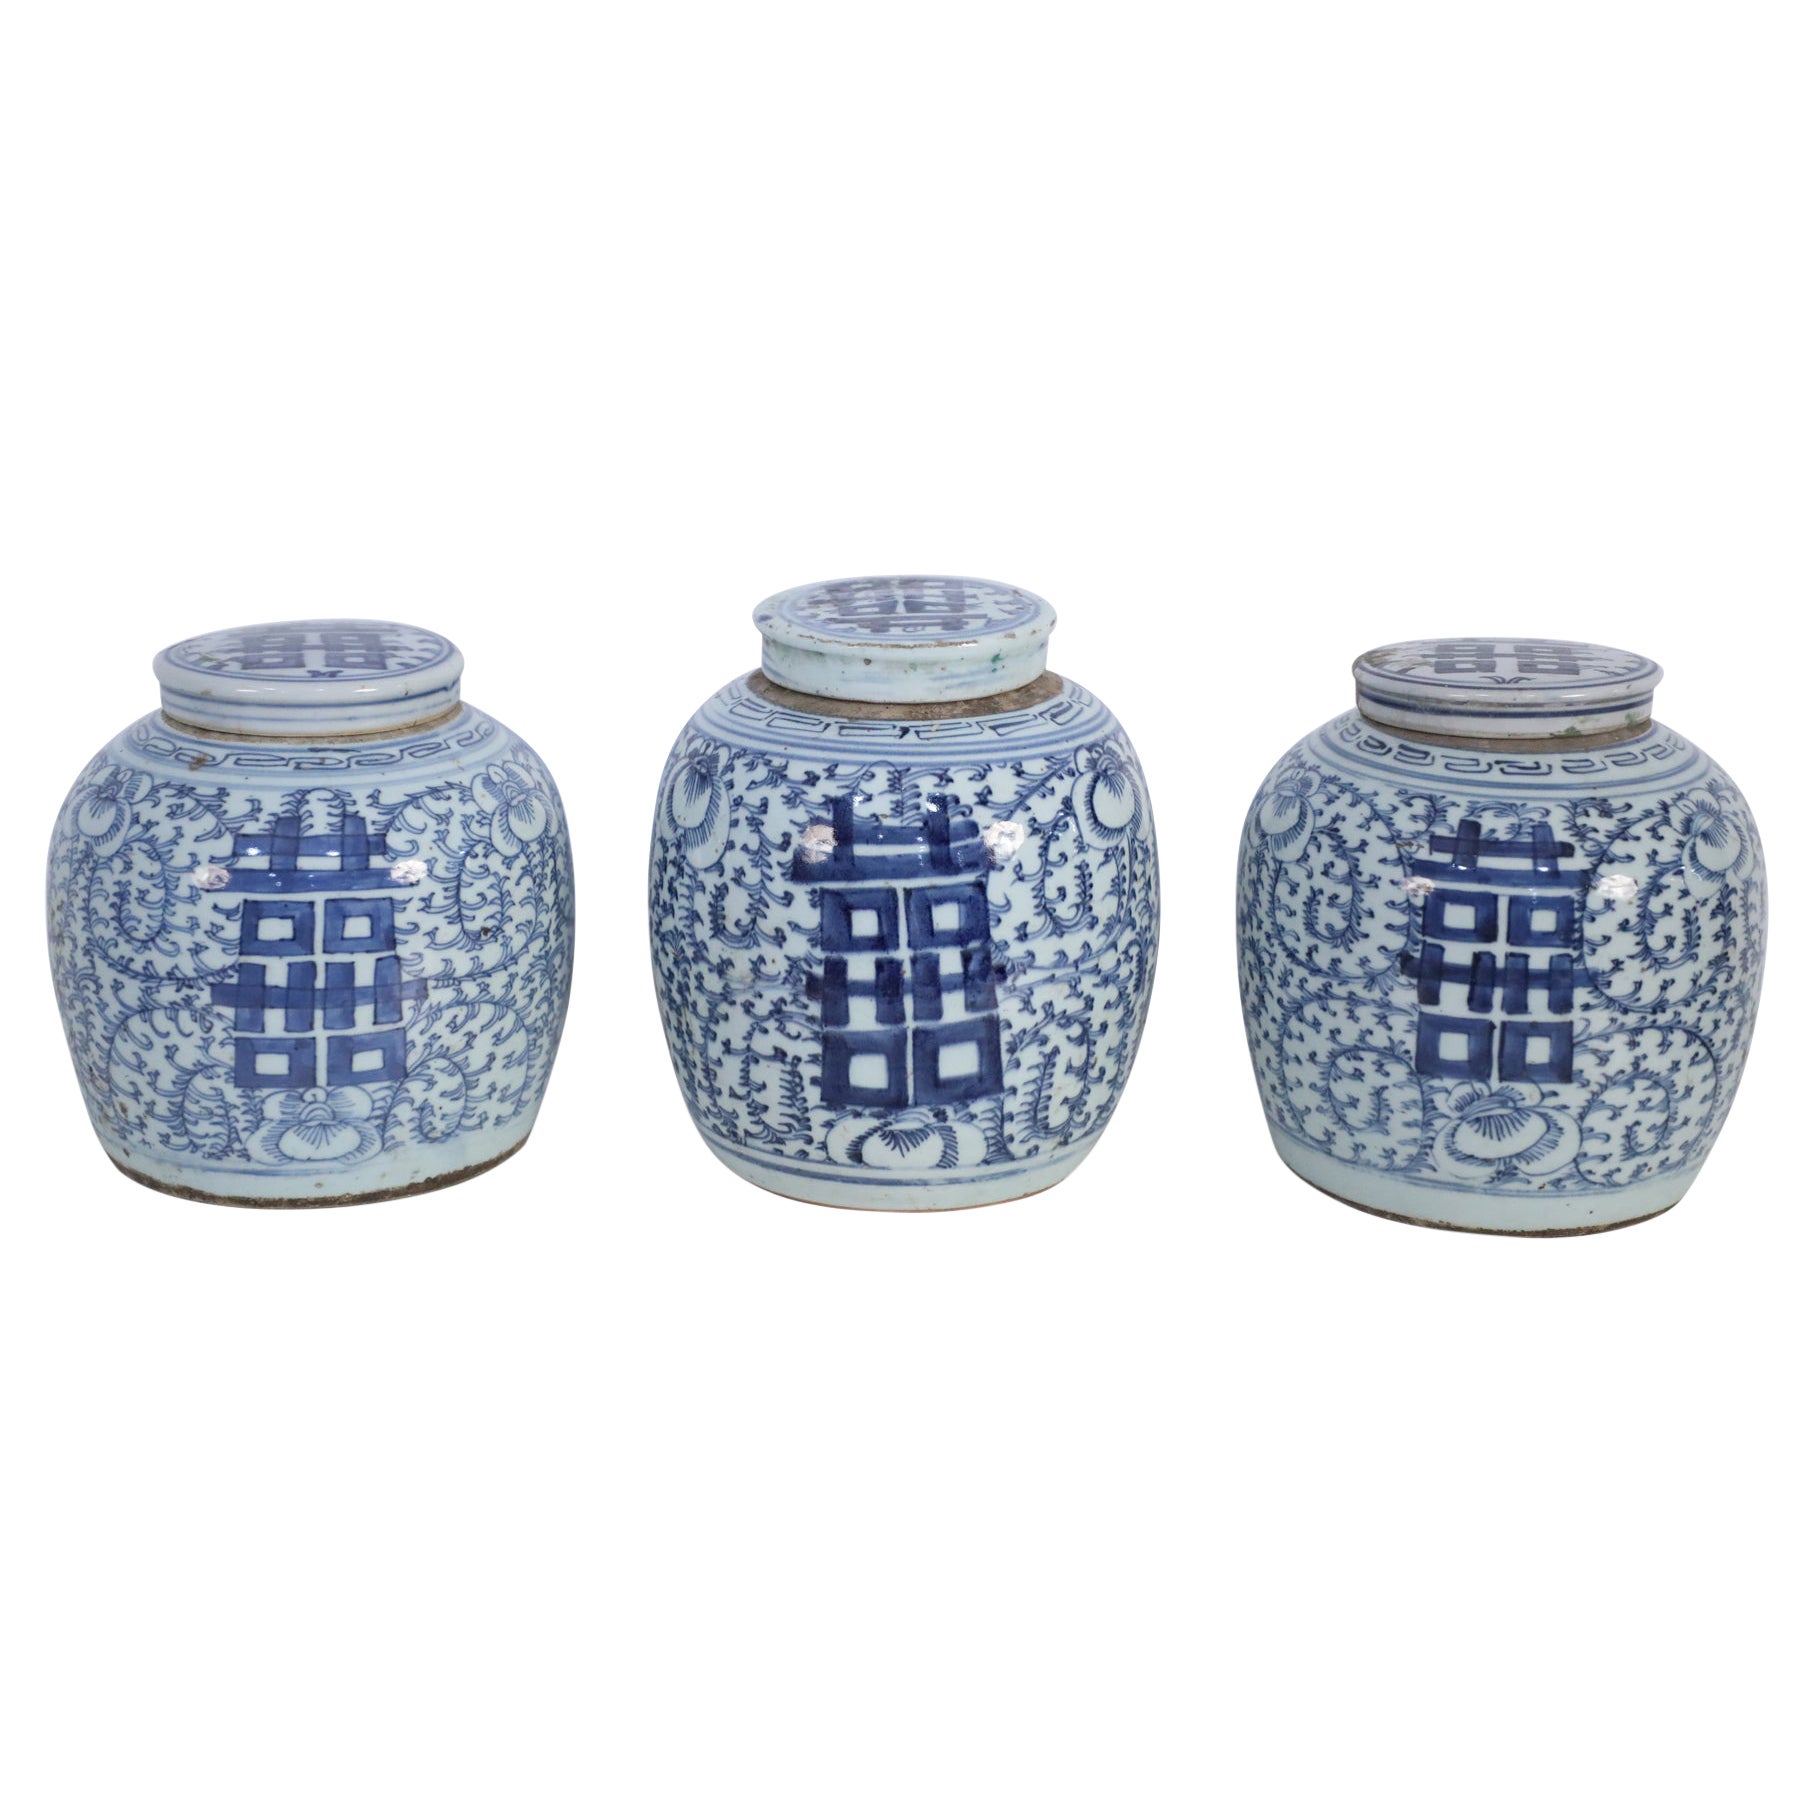 Chinese White and Blue Character Lidded Ginger Jar Vases